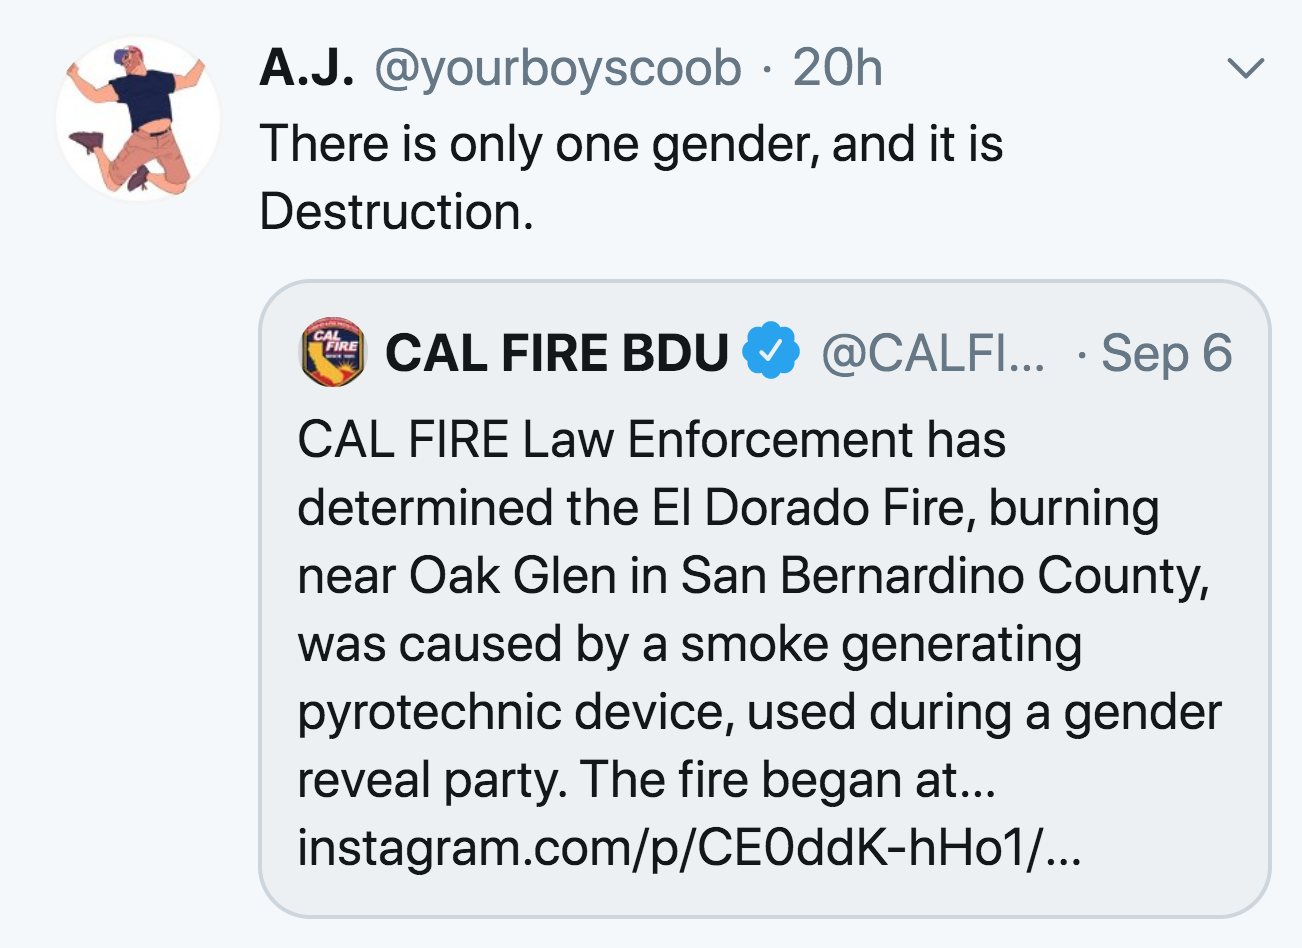 application virtualization definition - v A.J. 20h There is only one gender, and it is Destruction. Chung Cal Fire Bdu ... Sep 6 Cal Fire Law Enforcement has determined the El Dorado Fire, burning near Oak Glen in San Bernardino County, was caused by a sm